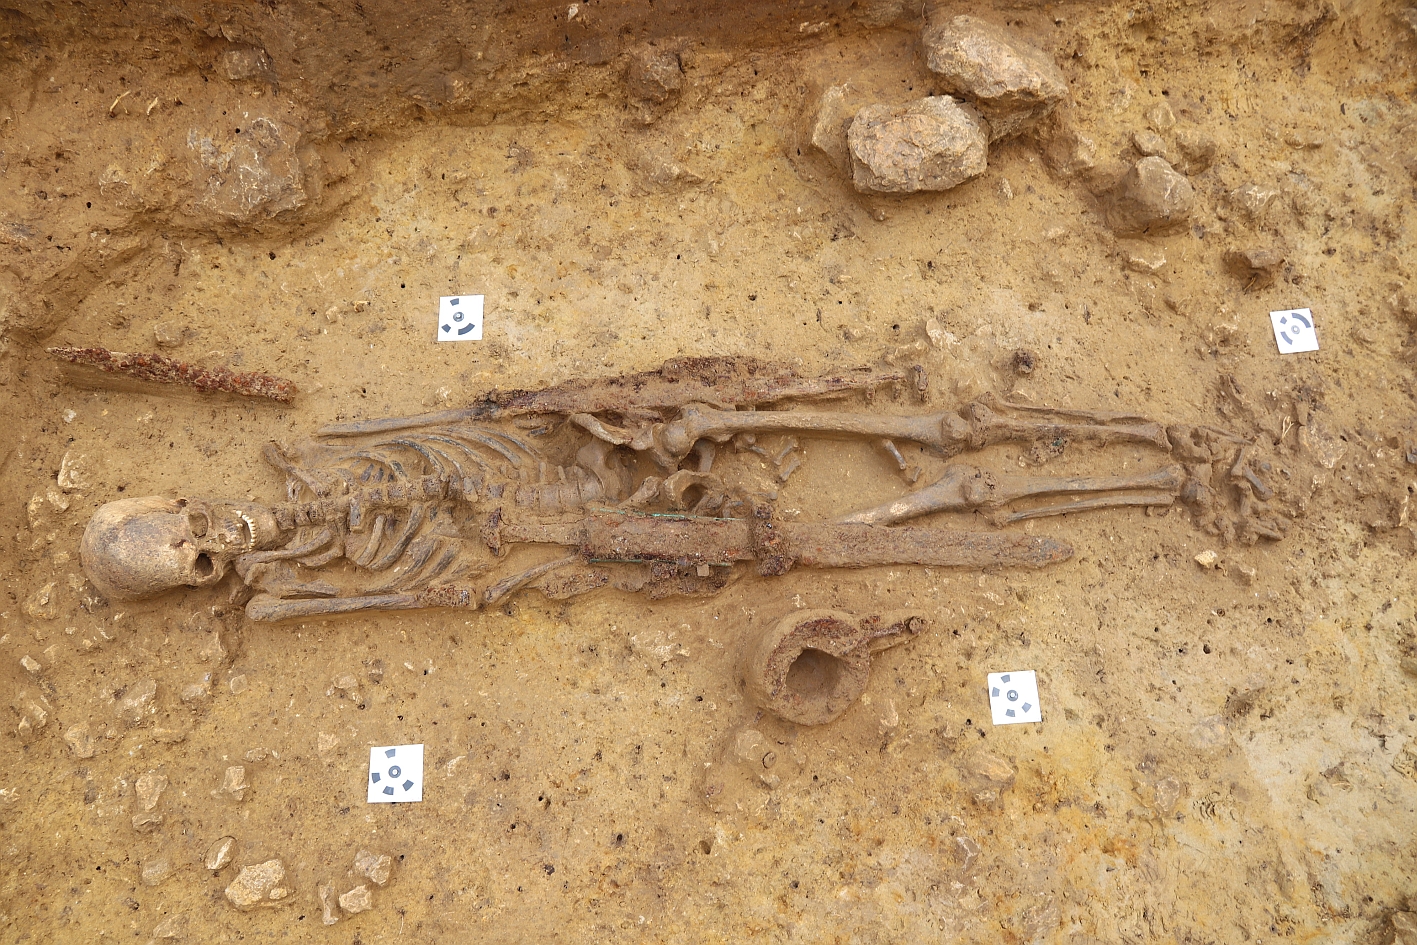 Archaeologists find 1,300-year-old grave of Frankish warrior with "full field"